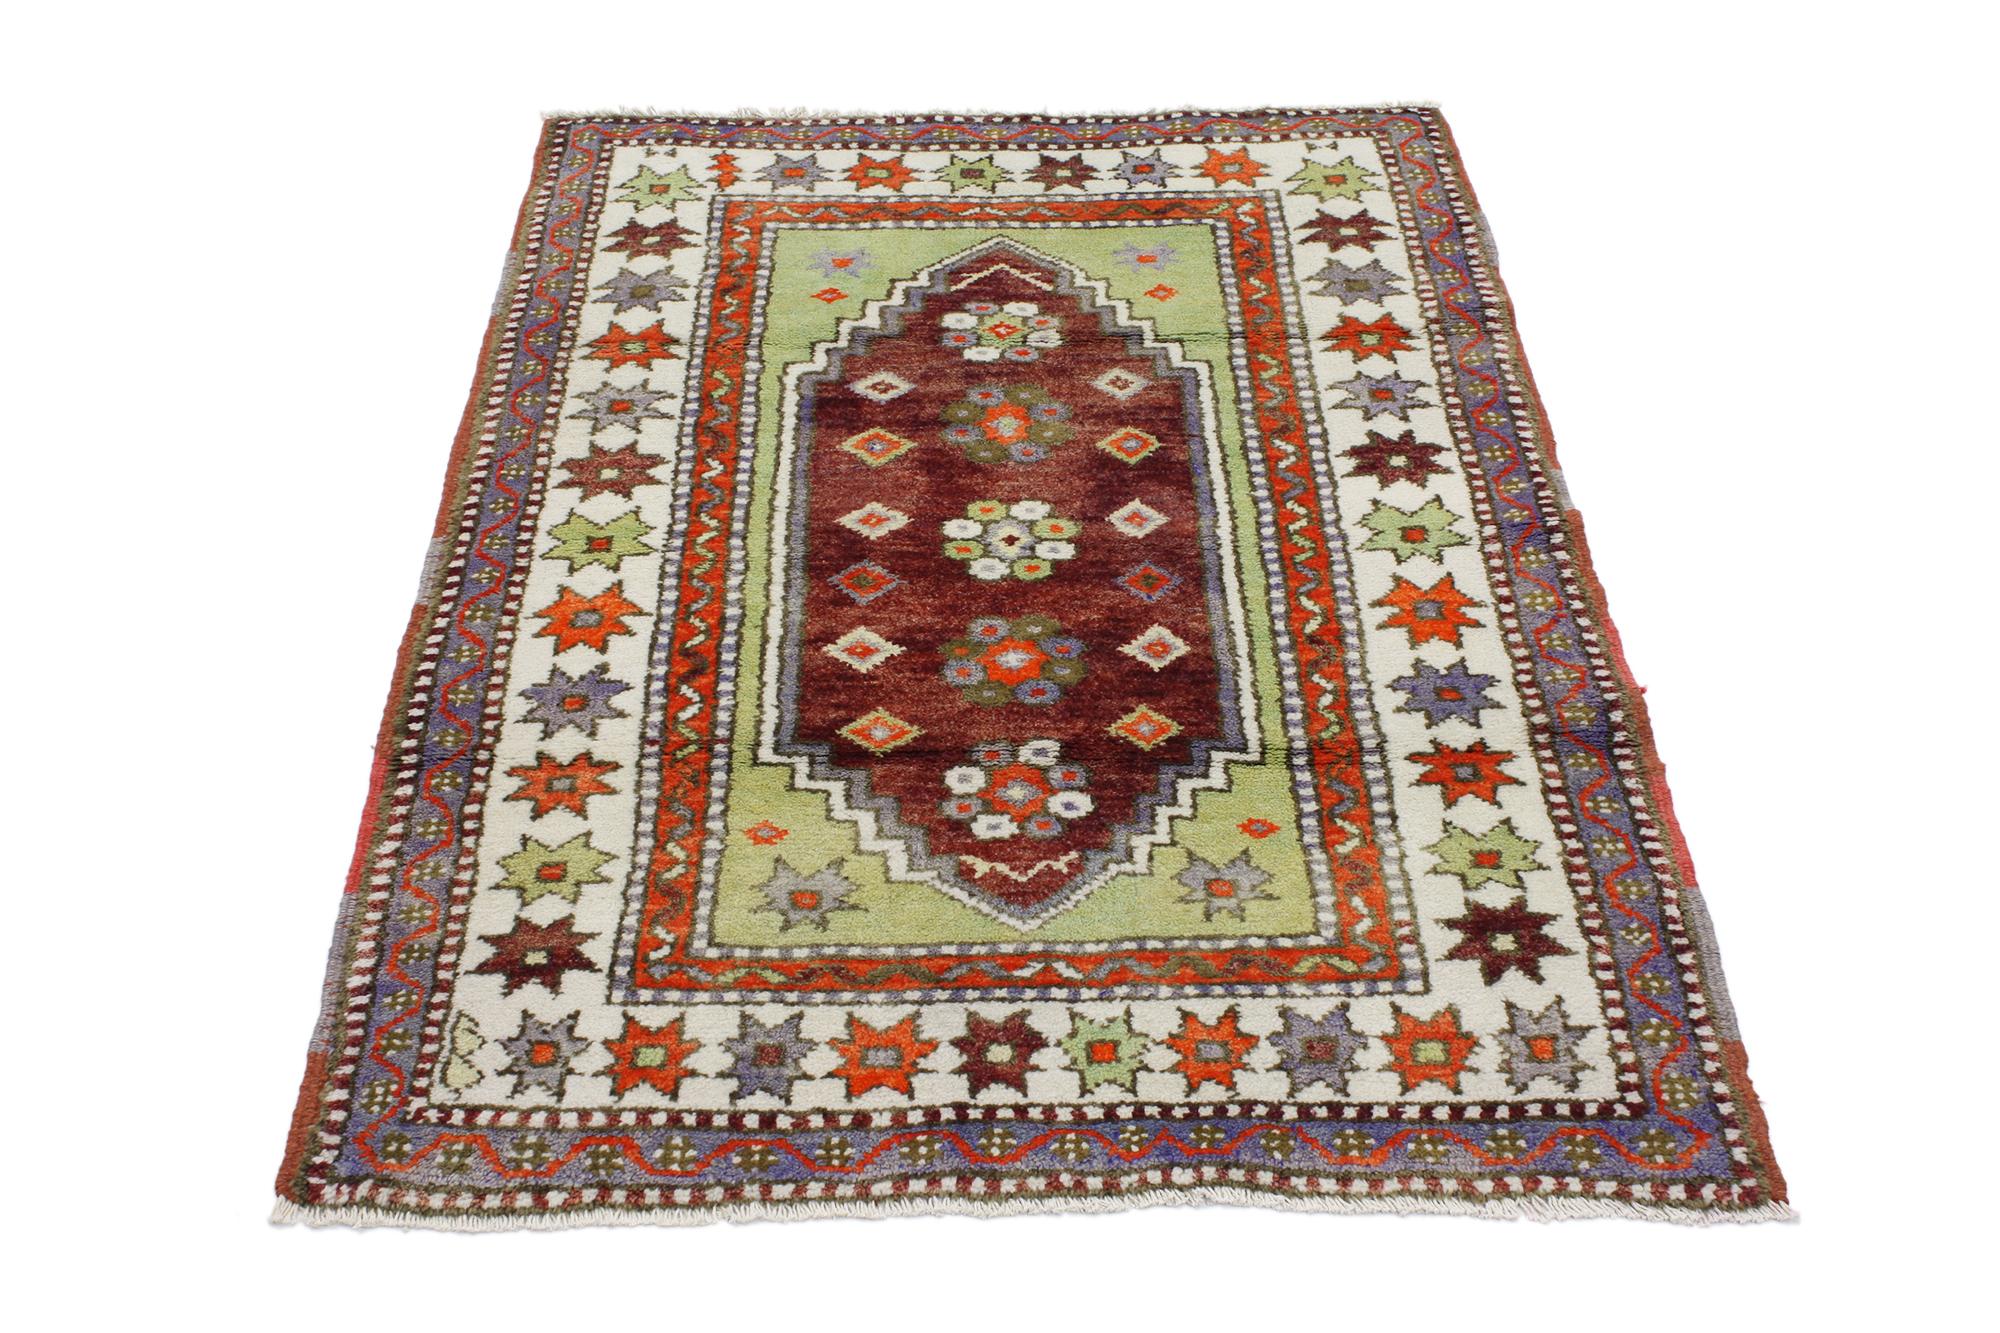 Vintage Turkish Yuntdag Oushak Rug, Tribal Allure Meets Worldly Sophistication In Good Condition For Sale In Dallas, TX